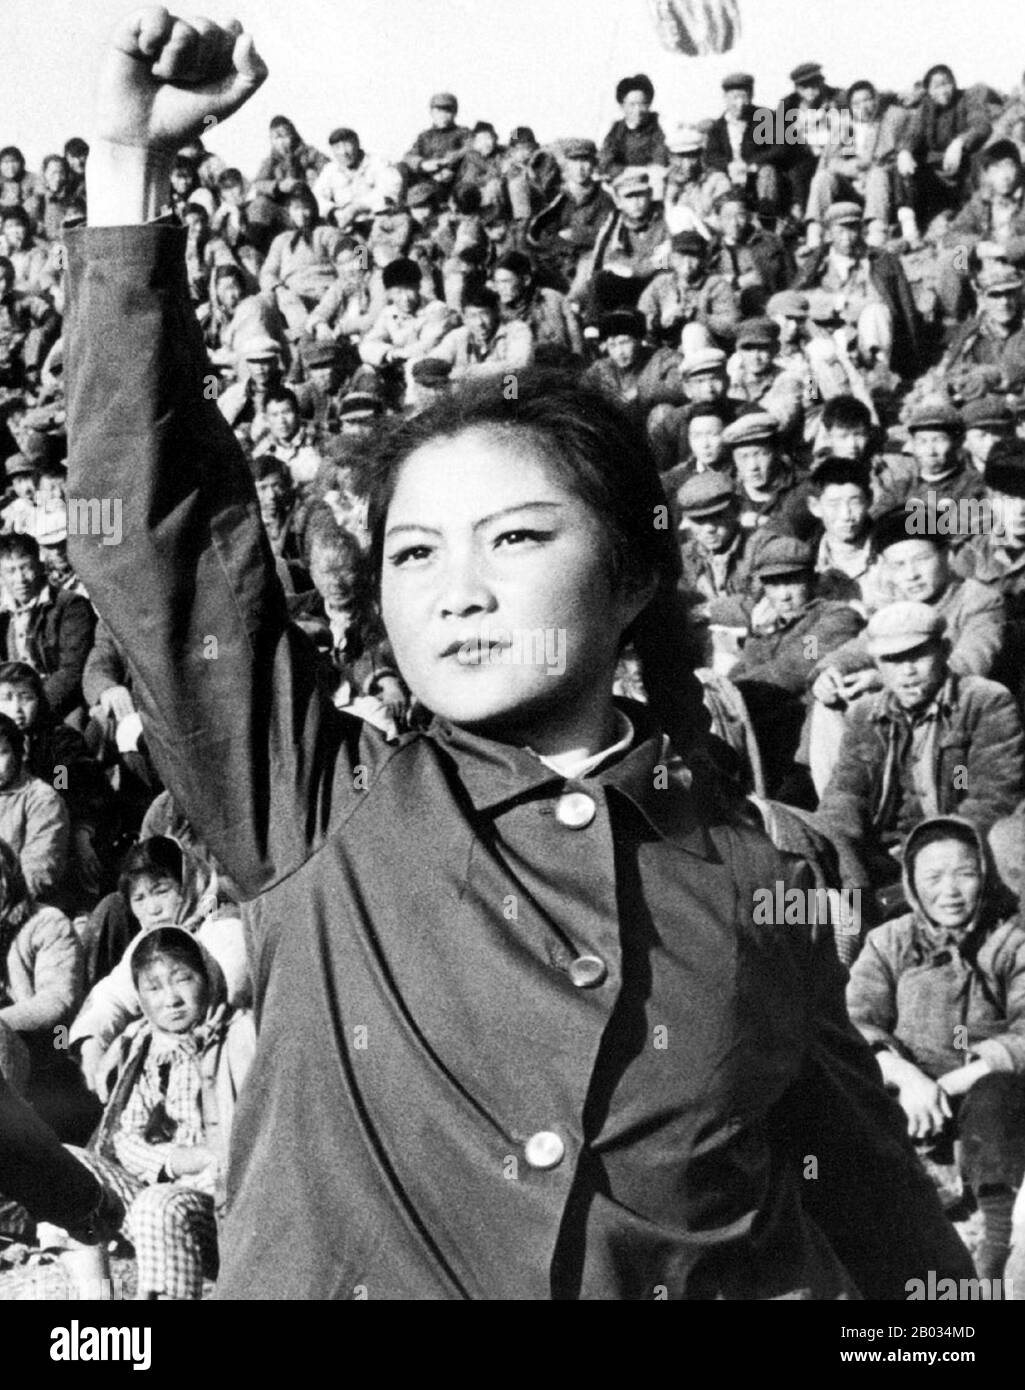 The Great Proletarian Cultural Revolution, commonly known as the Cultural Revolution, was a socio-political movement that took place in the People's Republic of China from 1966 through 1976. Set into motion by Mao Zedong, then Chairman of the Communist Party of China, its stated goal was to enforce socialism in the country by removing capitalist, traditional and cultural elements from Chinese society, and impose Maoist orthodoxy within the Party.   The Cultural Revolution damaged the country on a great scale economically and socially. Millions of people were persecuted in the violent factional Stock Photo